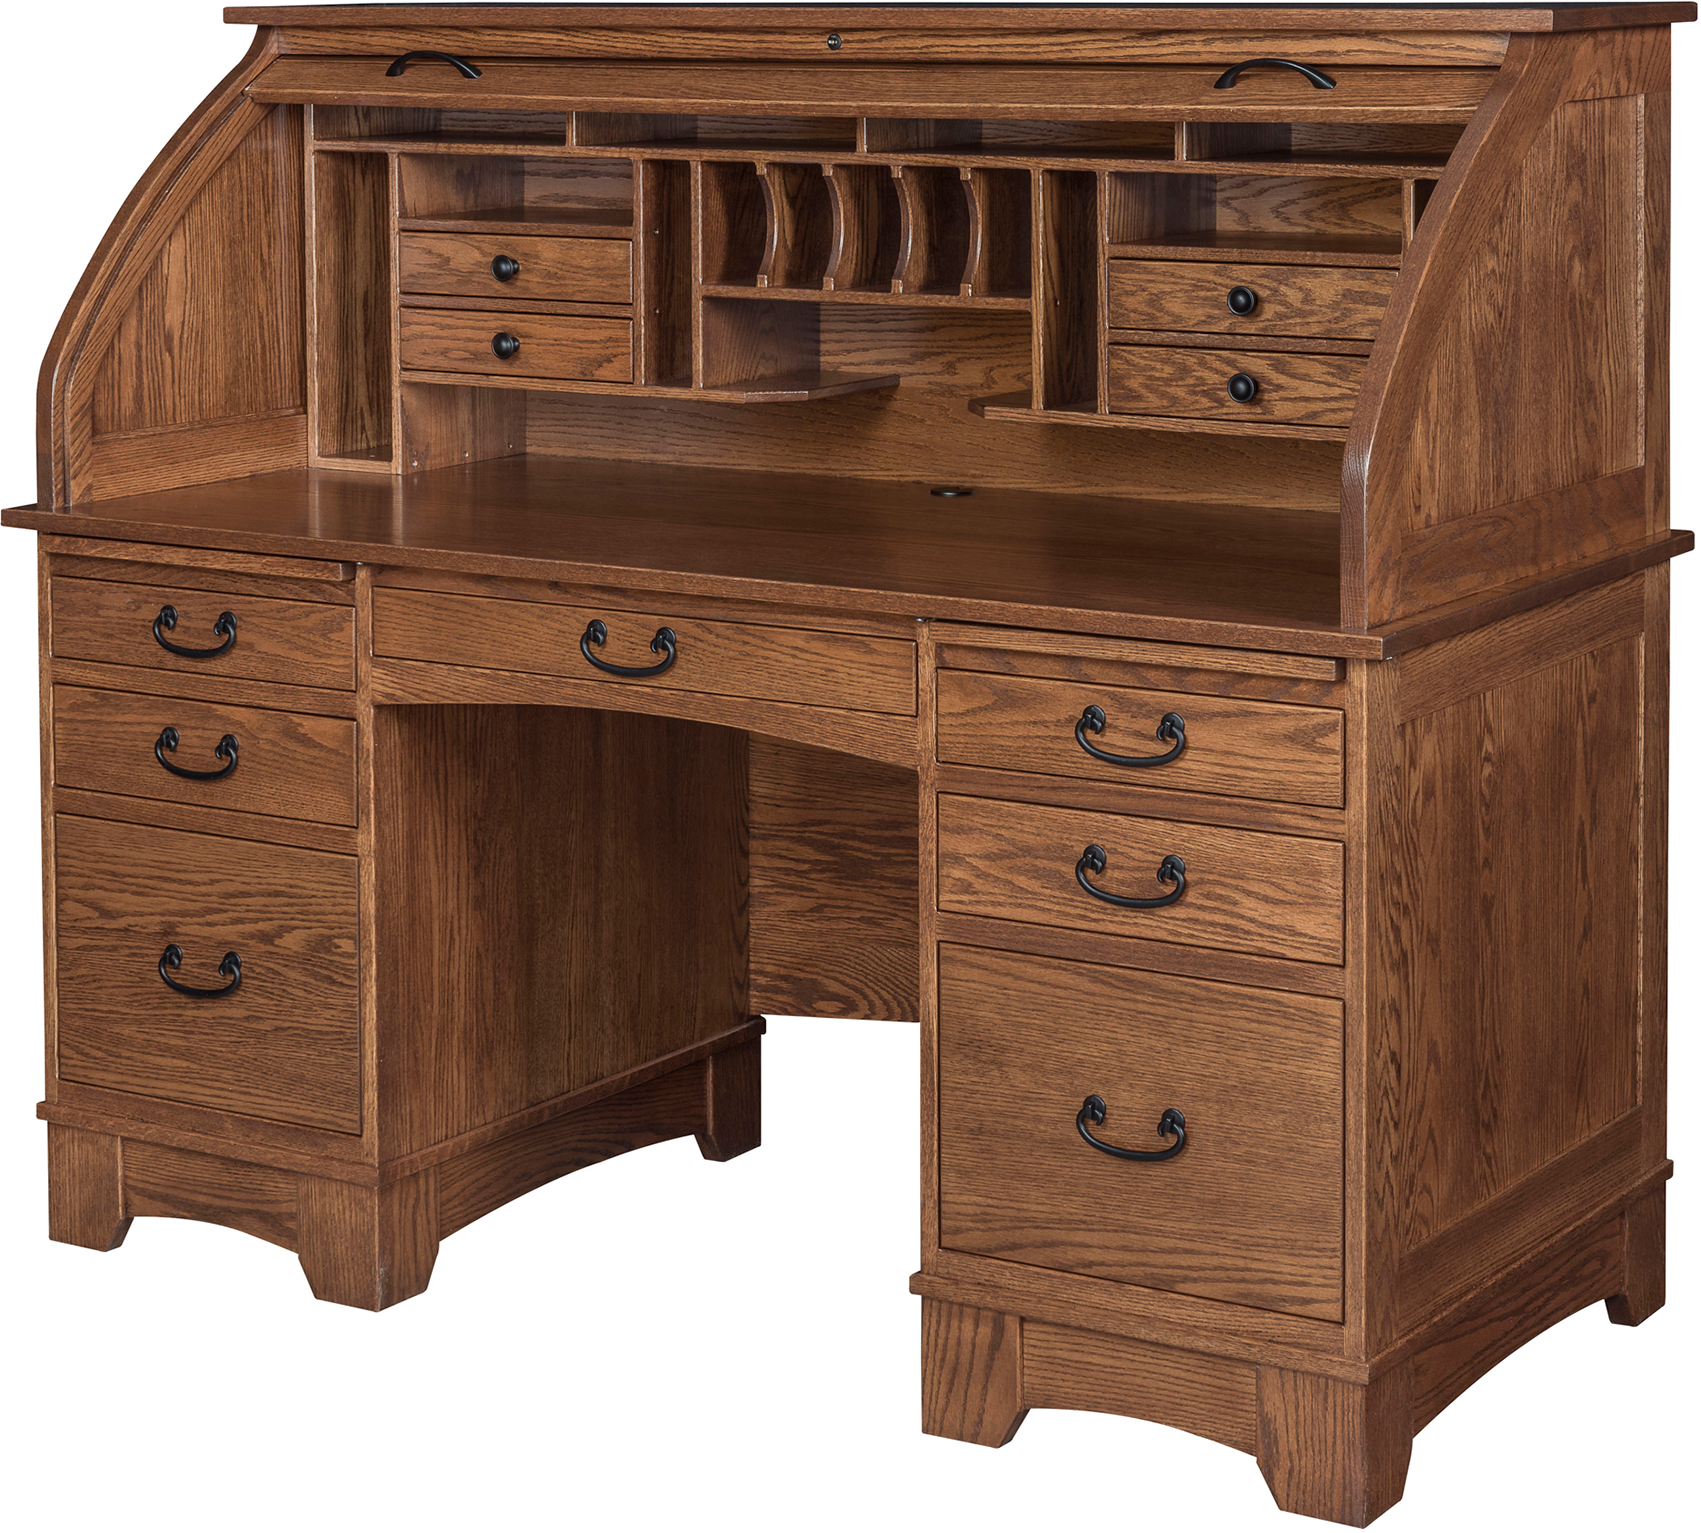 Roll Top Desk Solid Oak Wood - 54 Inch Deluxe Executive Rolltop Desk  Burnished Walnut Stain for Home Office Secretary Organizer Roll Hutch Top  Easy